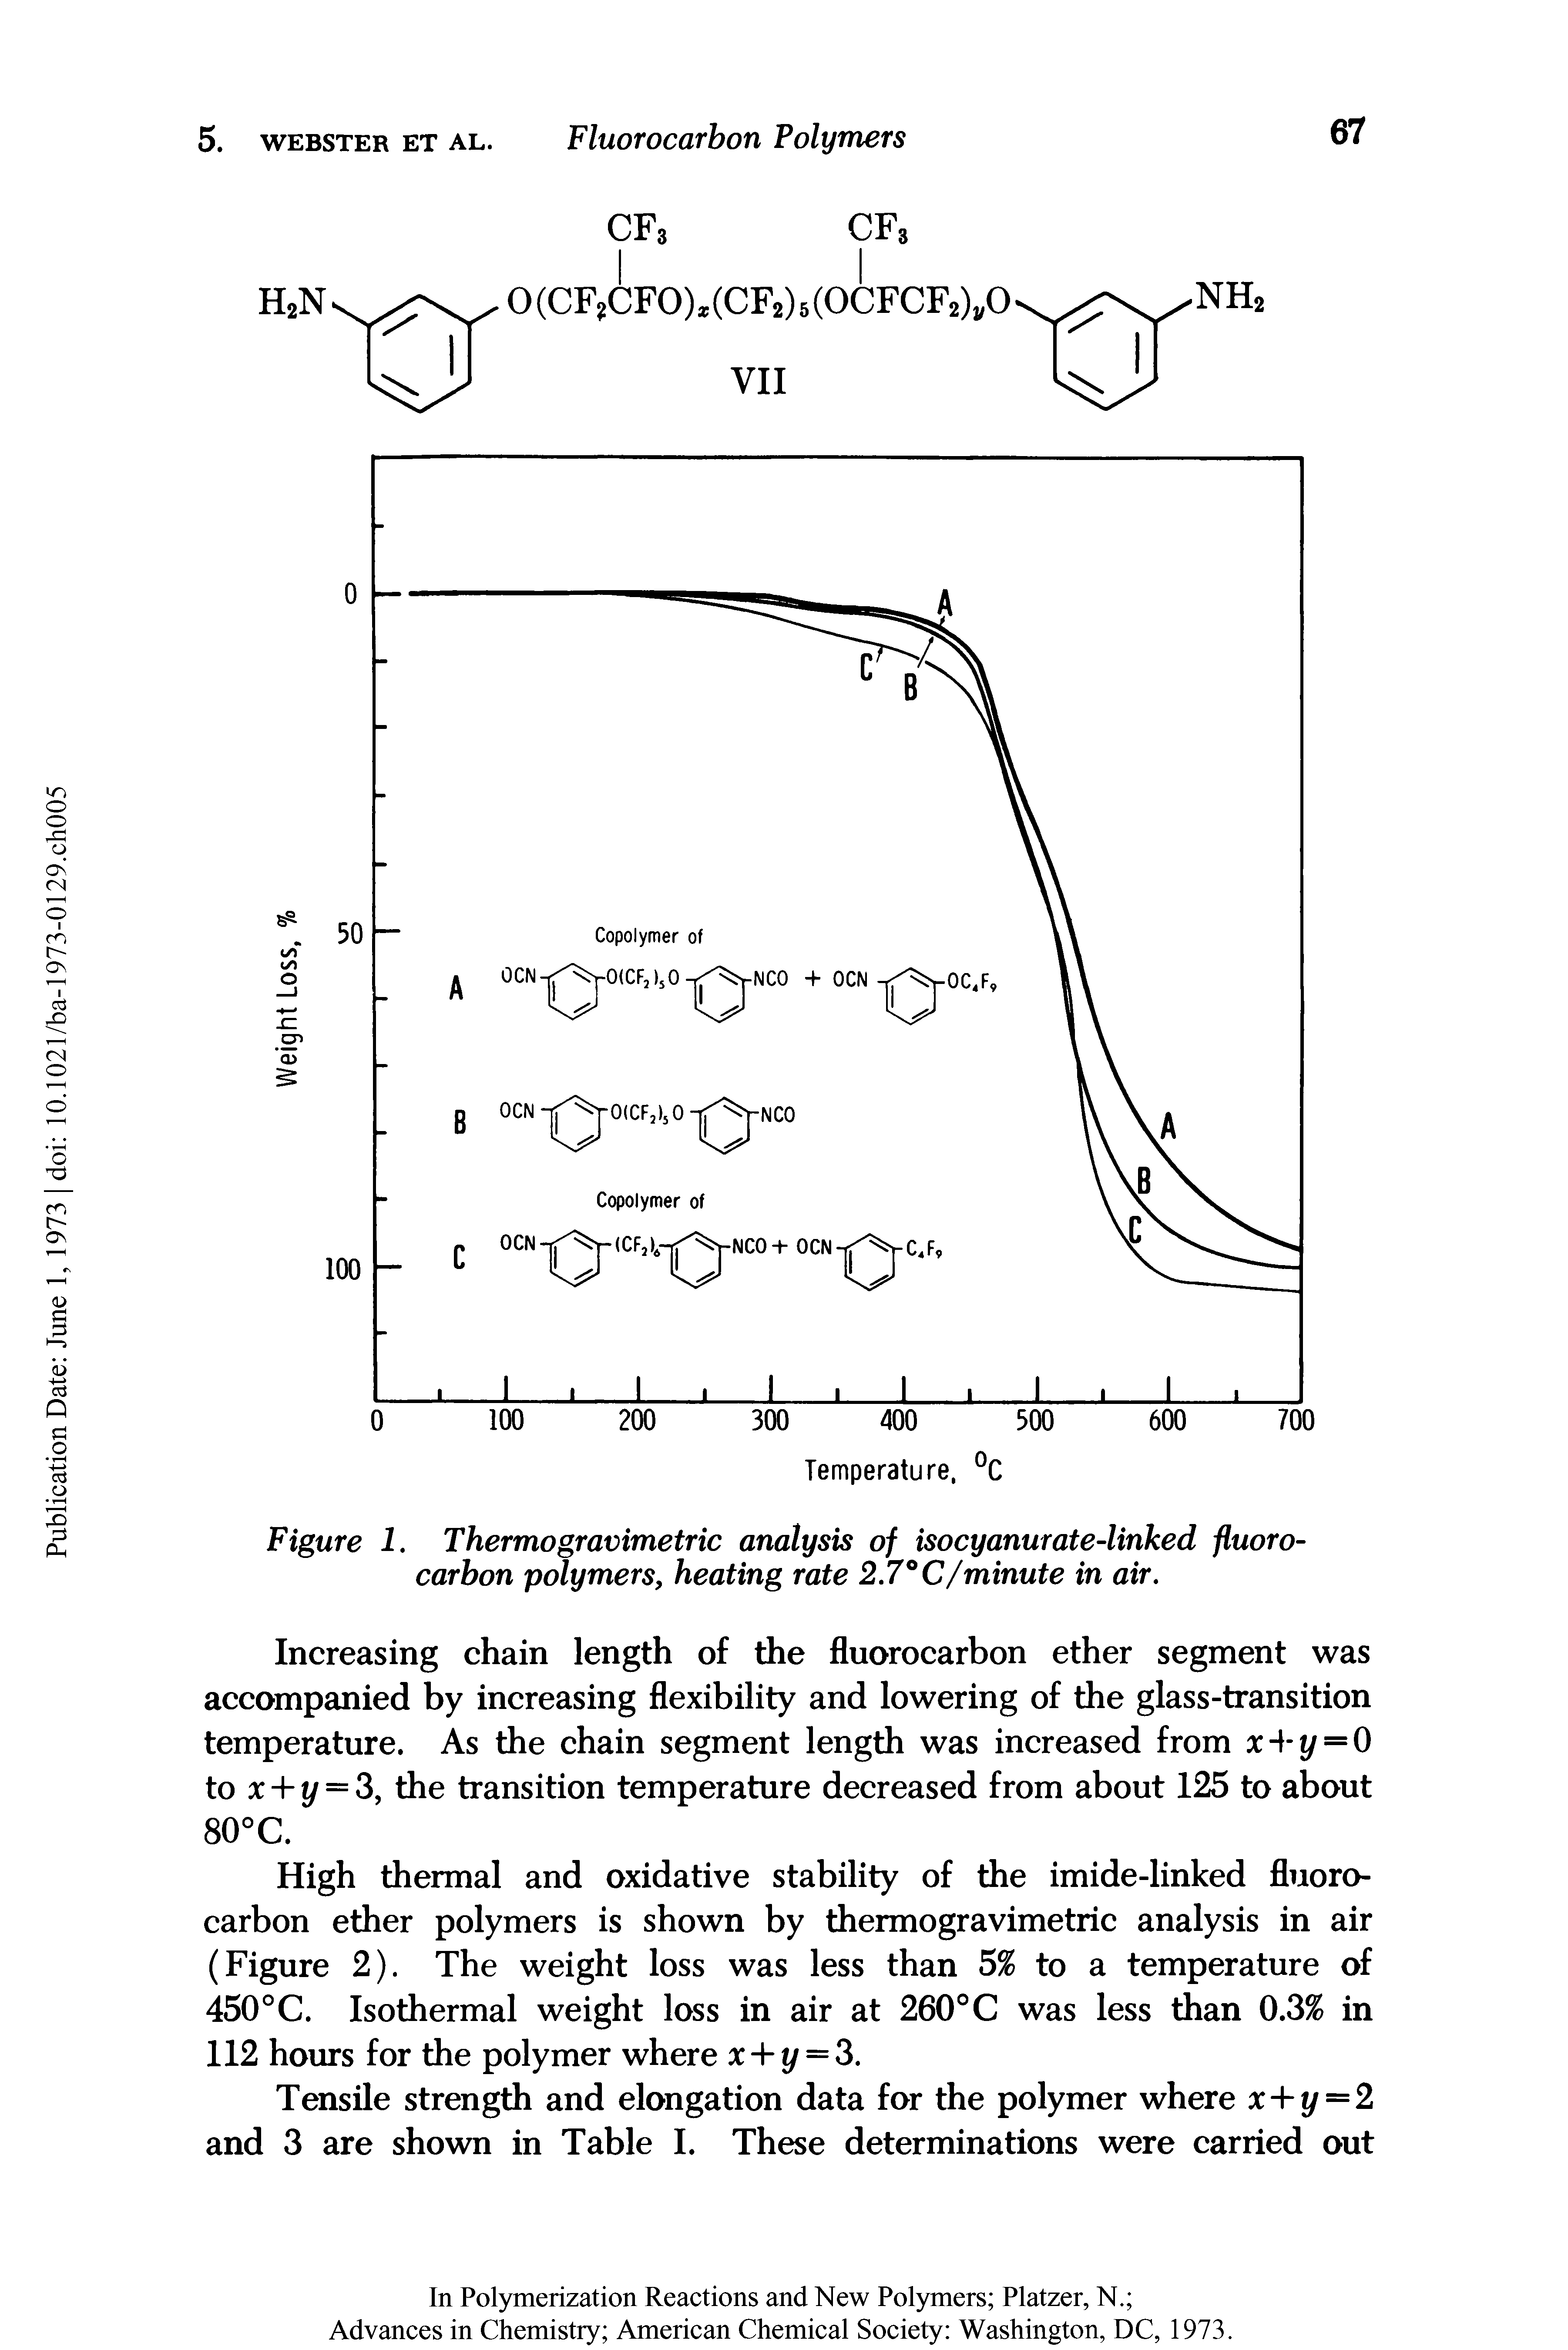 Figure 1. Thermo gravimetric analysis of isocyanurate-linked fluorocarbon polymers, heating rate 2.7° C/minute in air.